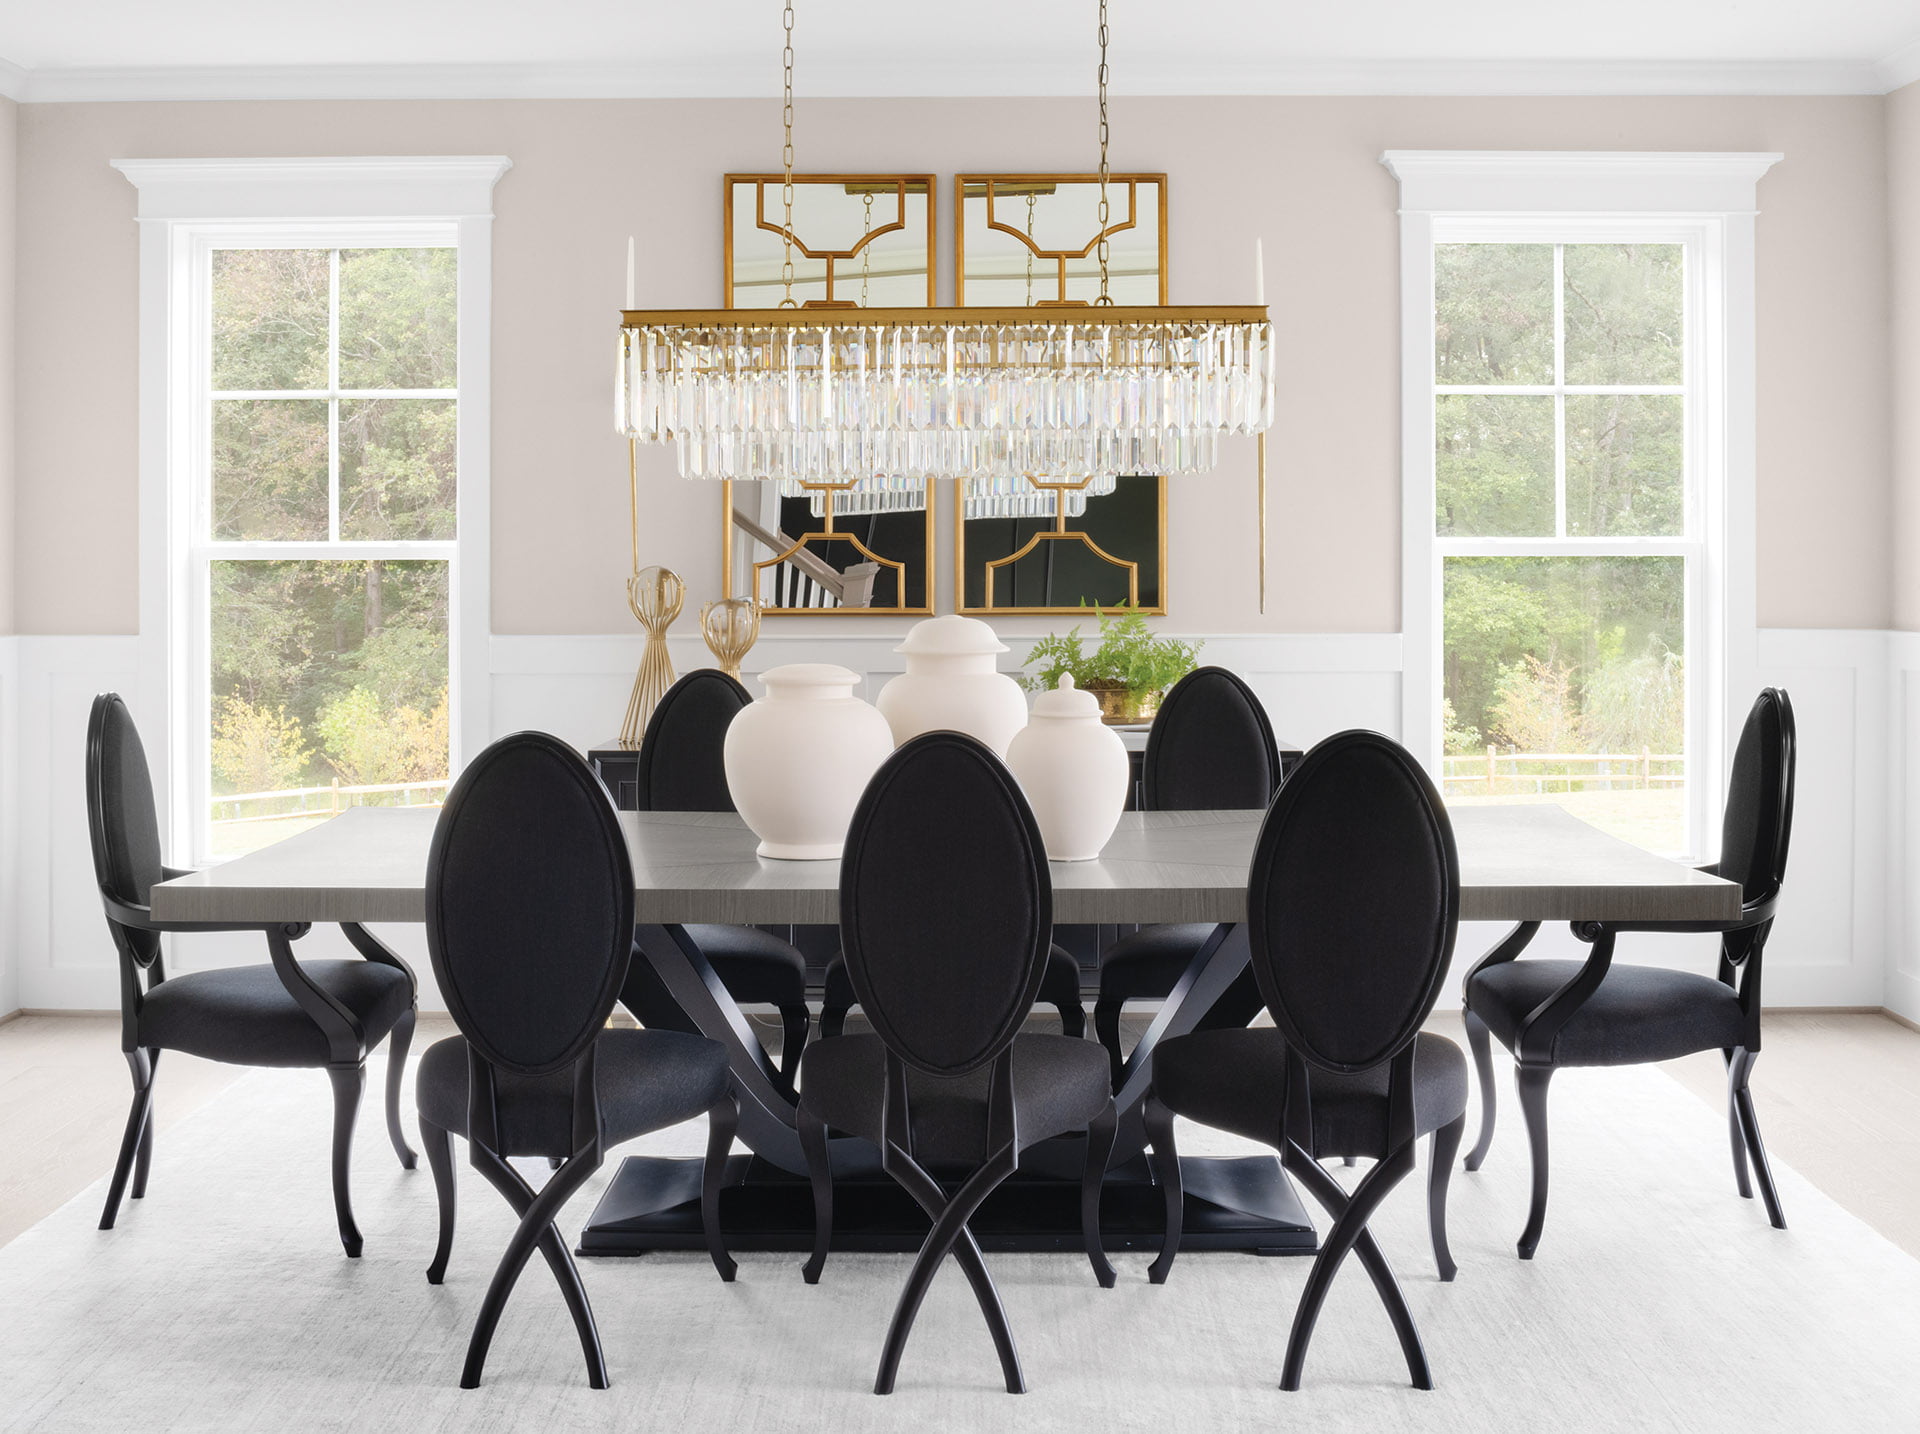 Craftsman-style Fairfax residence built by Evergreene Homes. Dining room with elegant Arhaus chandelier.